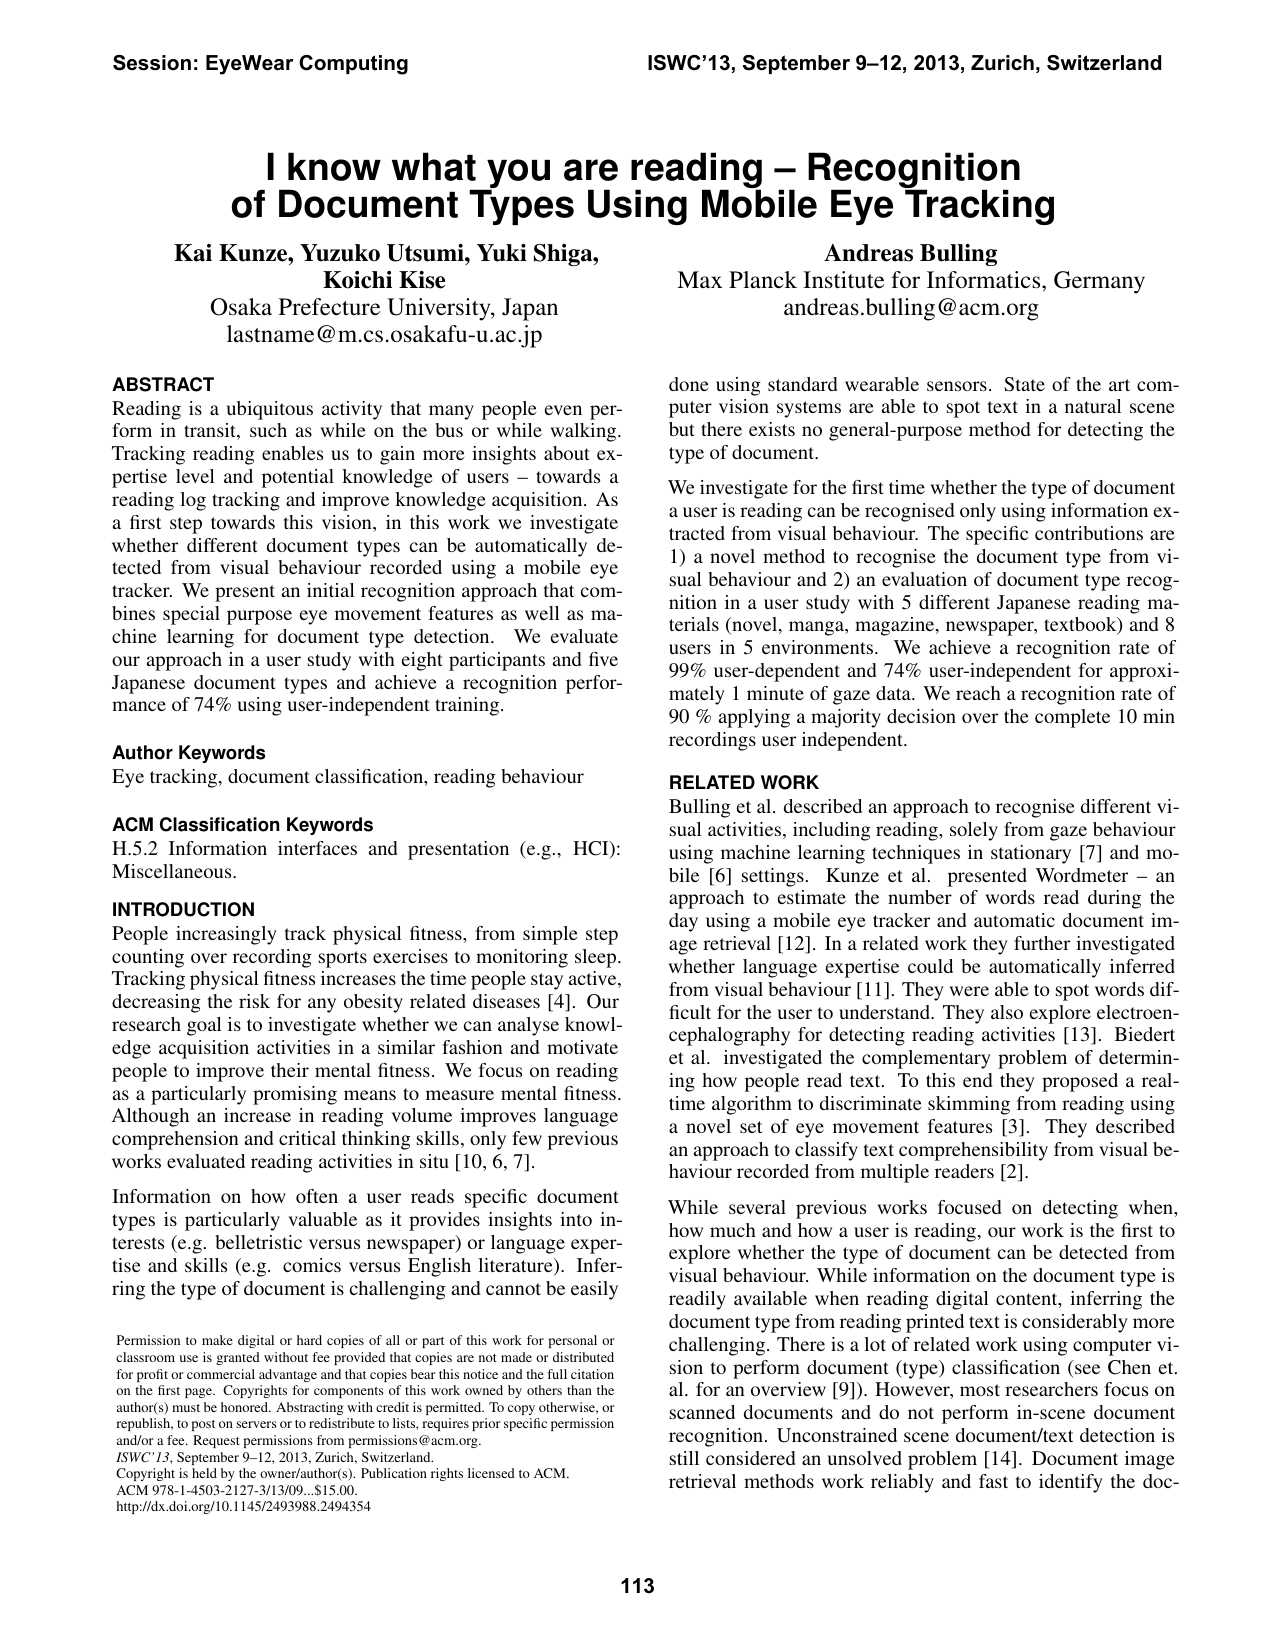 I know what you are reading – Recognition of document types using mobile eye tracking